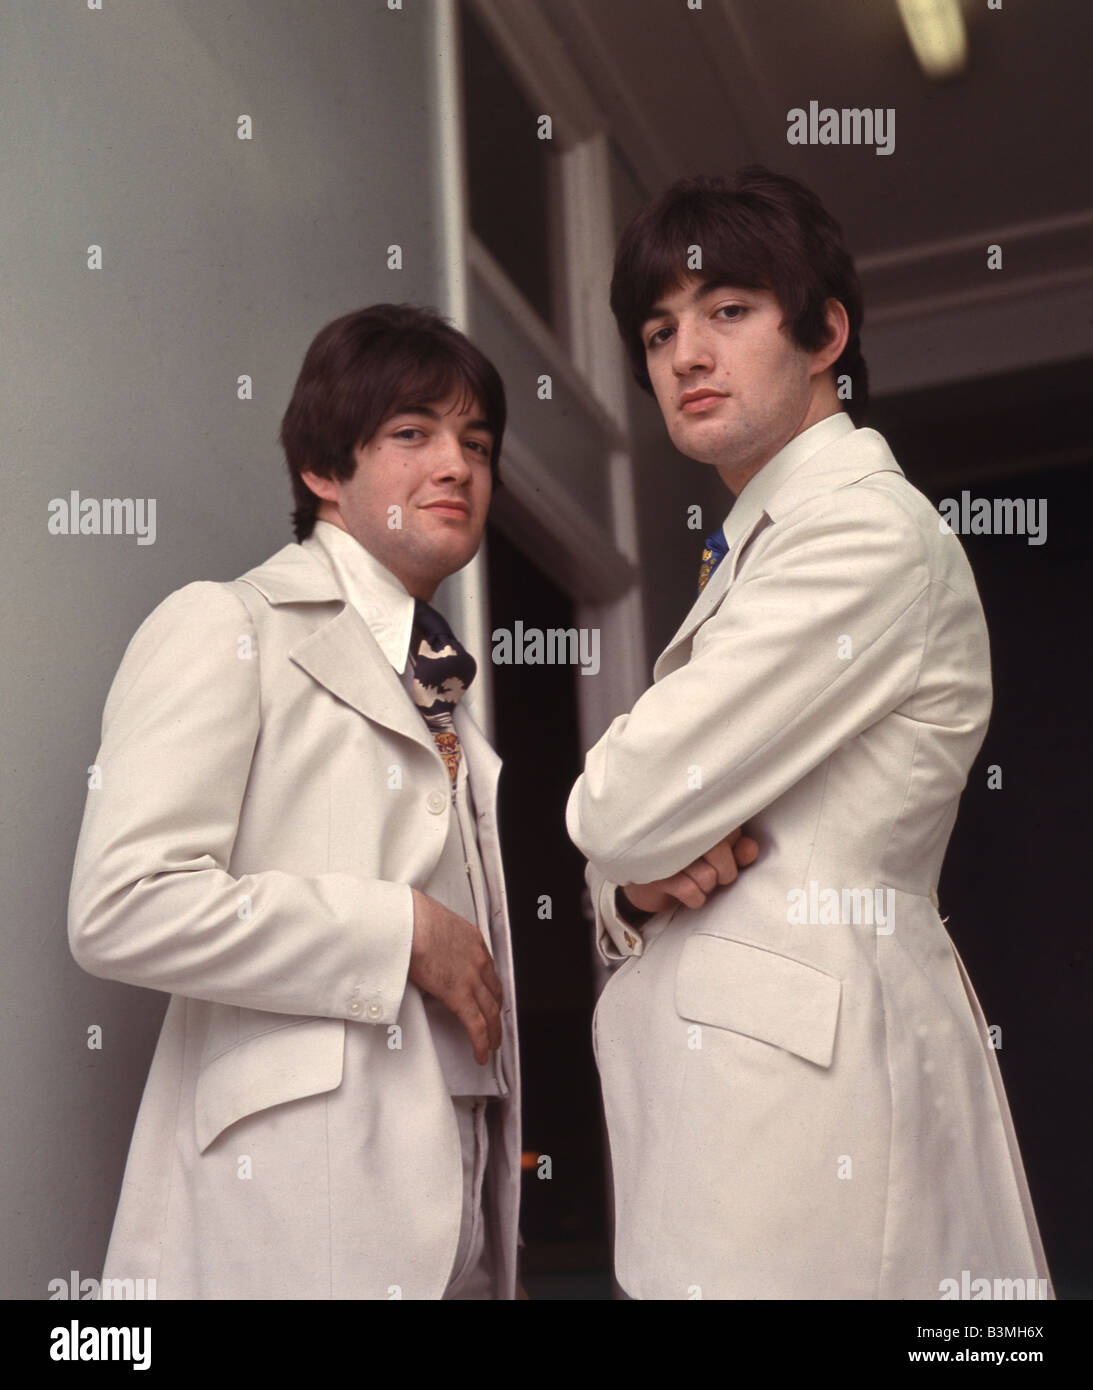 RYAN FRATELLI UK duo pop in 1966 con Paolo a sinistra e Barry a destra Foto Stock